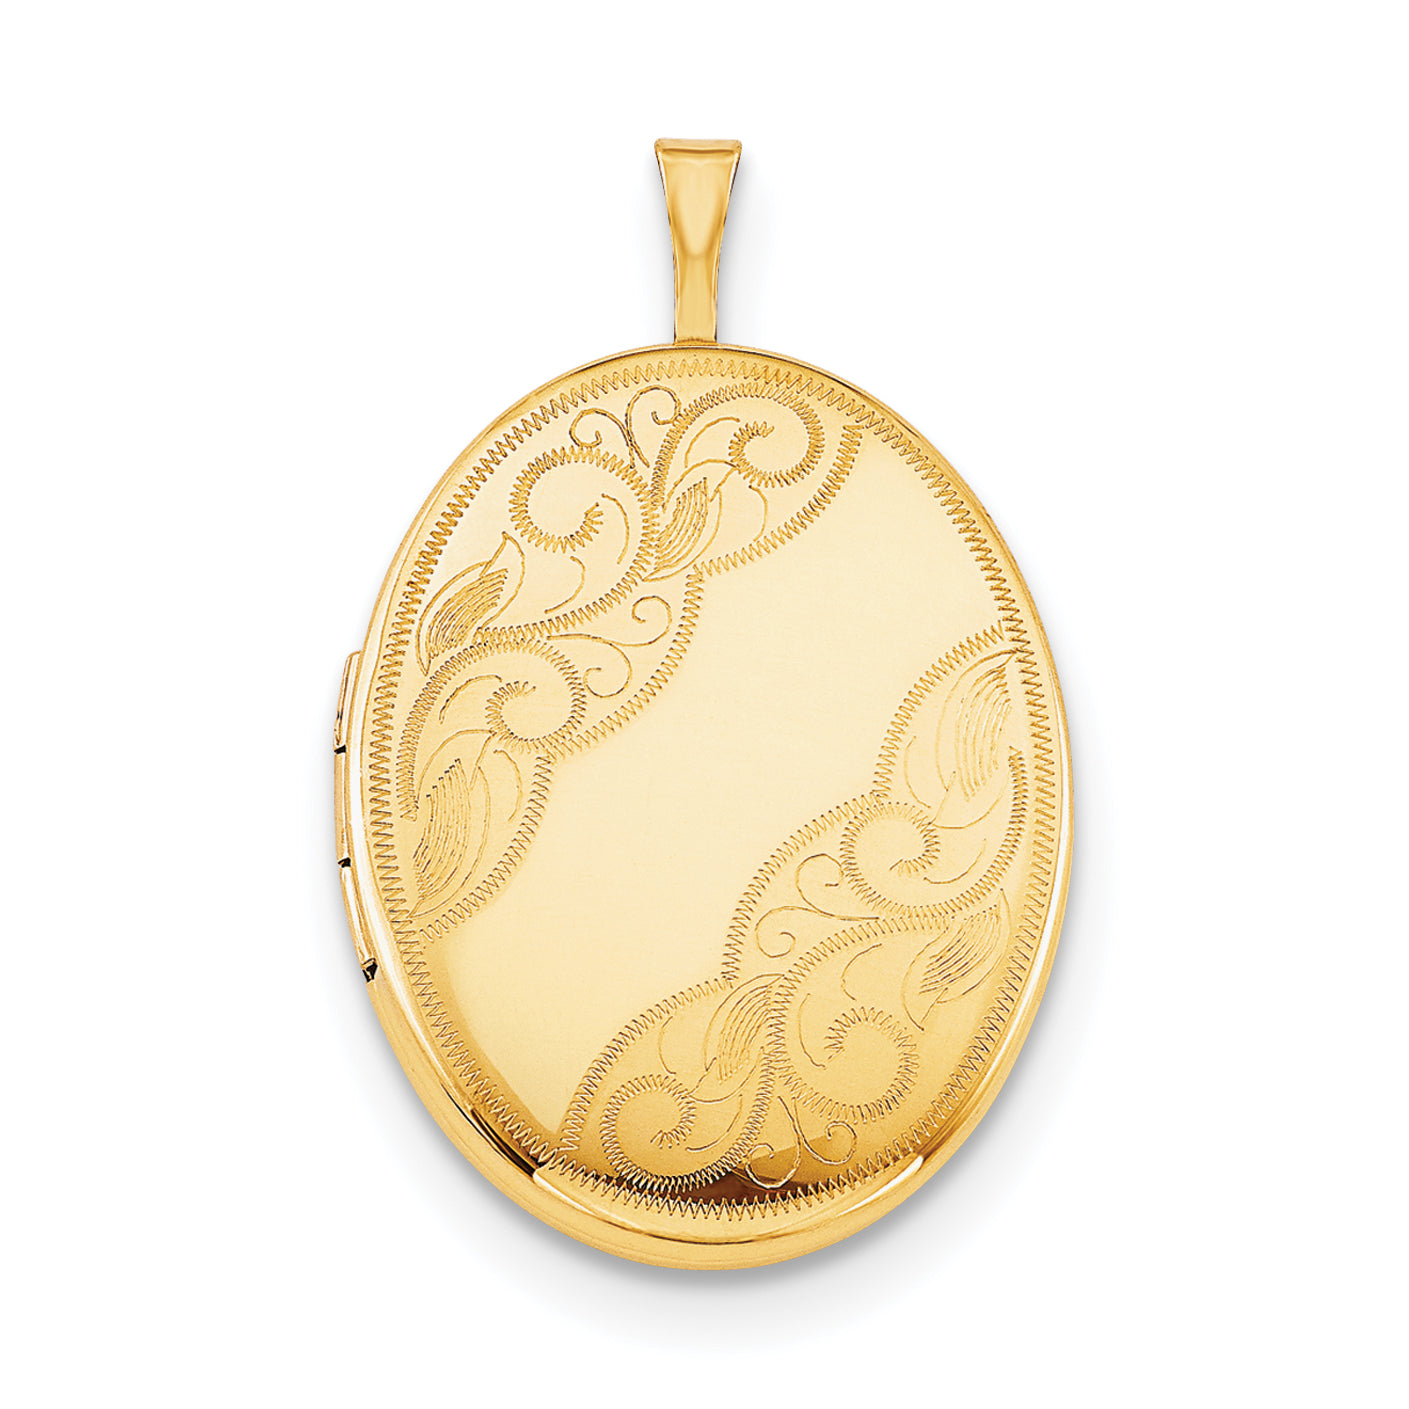 1/20 Gold Filled 26mm Swirled Oval Locket Necklace